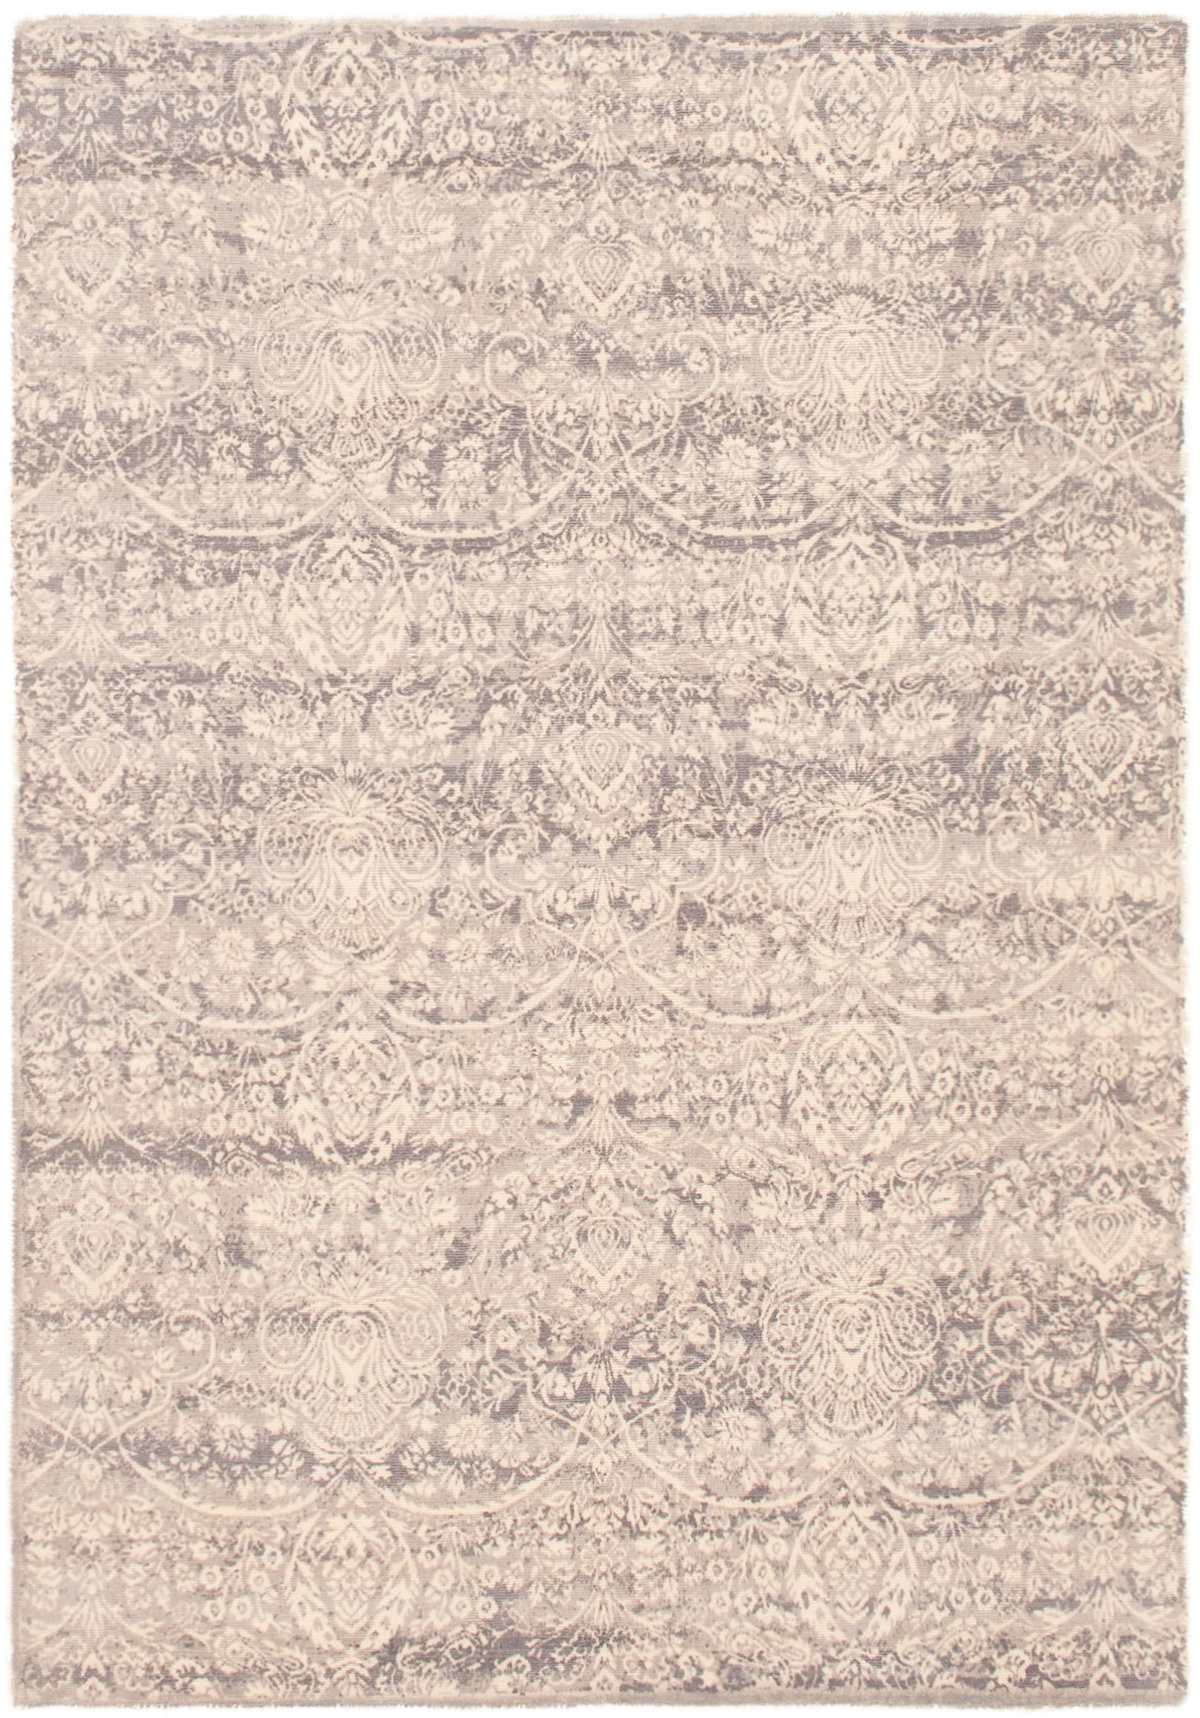 Hand-knotted Galleria Cream Viscose Rug 5'2" x 7'6" Size: 5'2" x 7'6"  